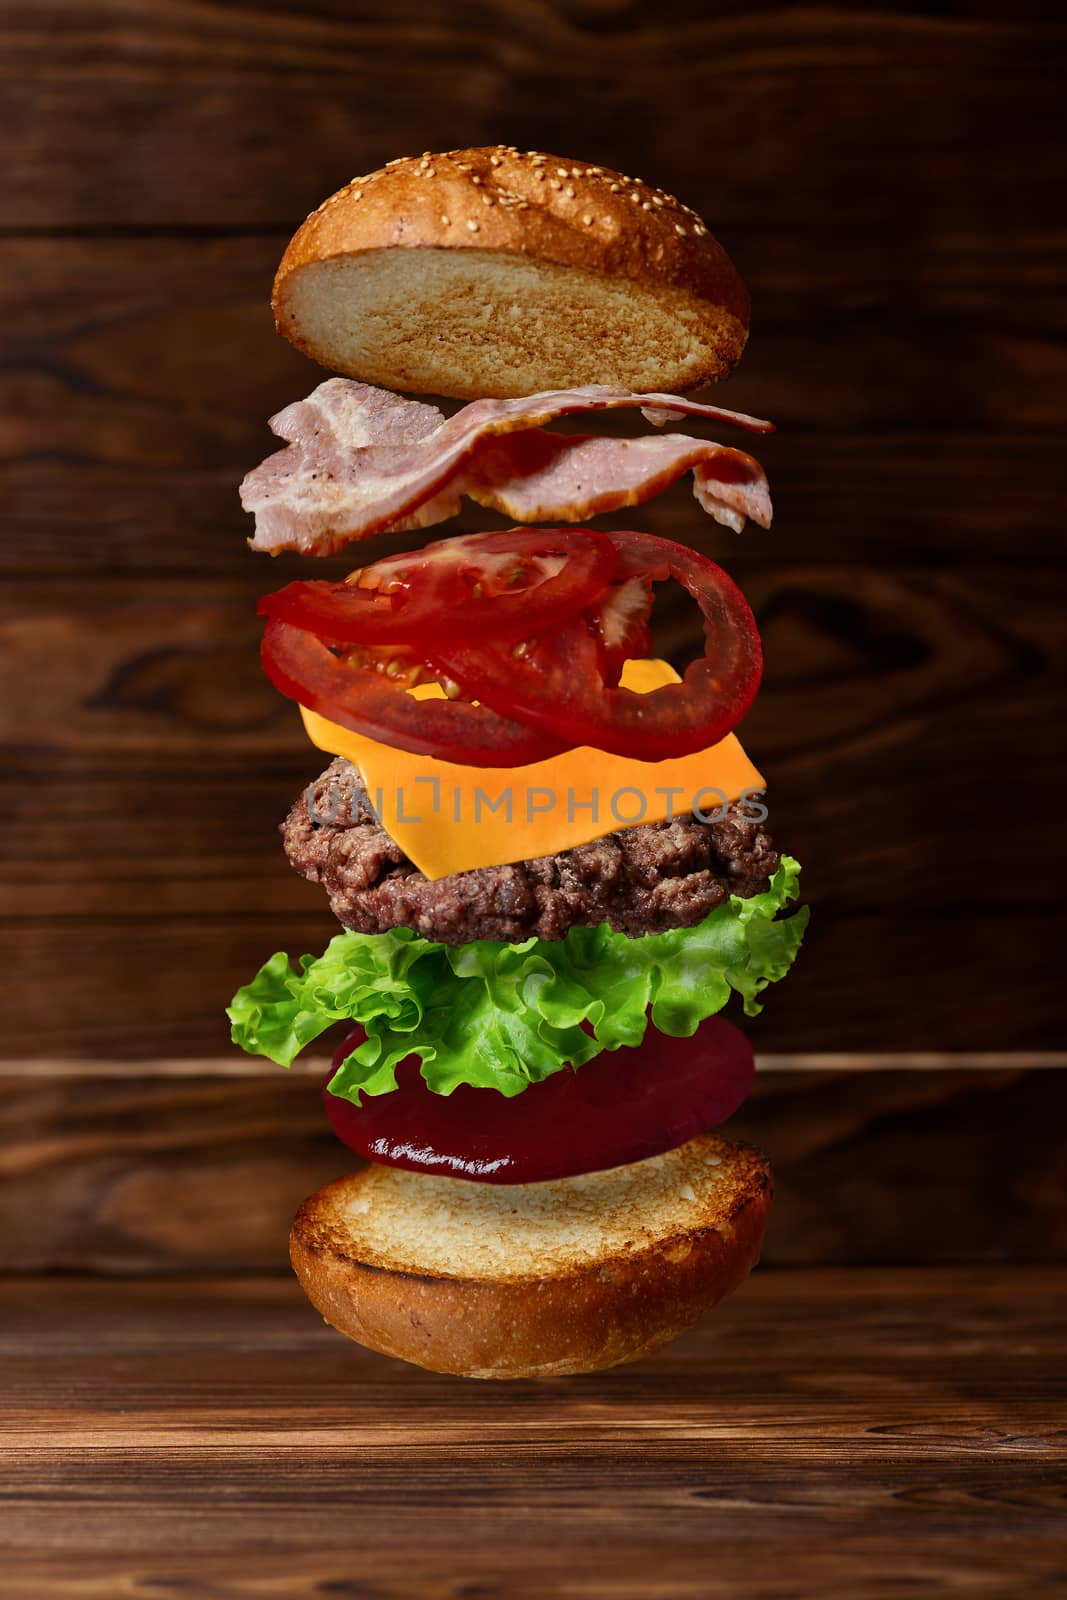 Big tasty burger with flying ingredients on wooden background. Stock photo of food levitation. Includes bun, sauce, salad leaf, cutlet, cheese, tomato slices and bacon